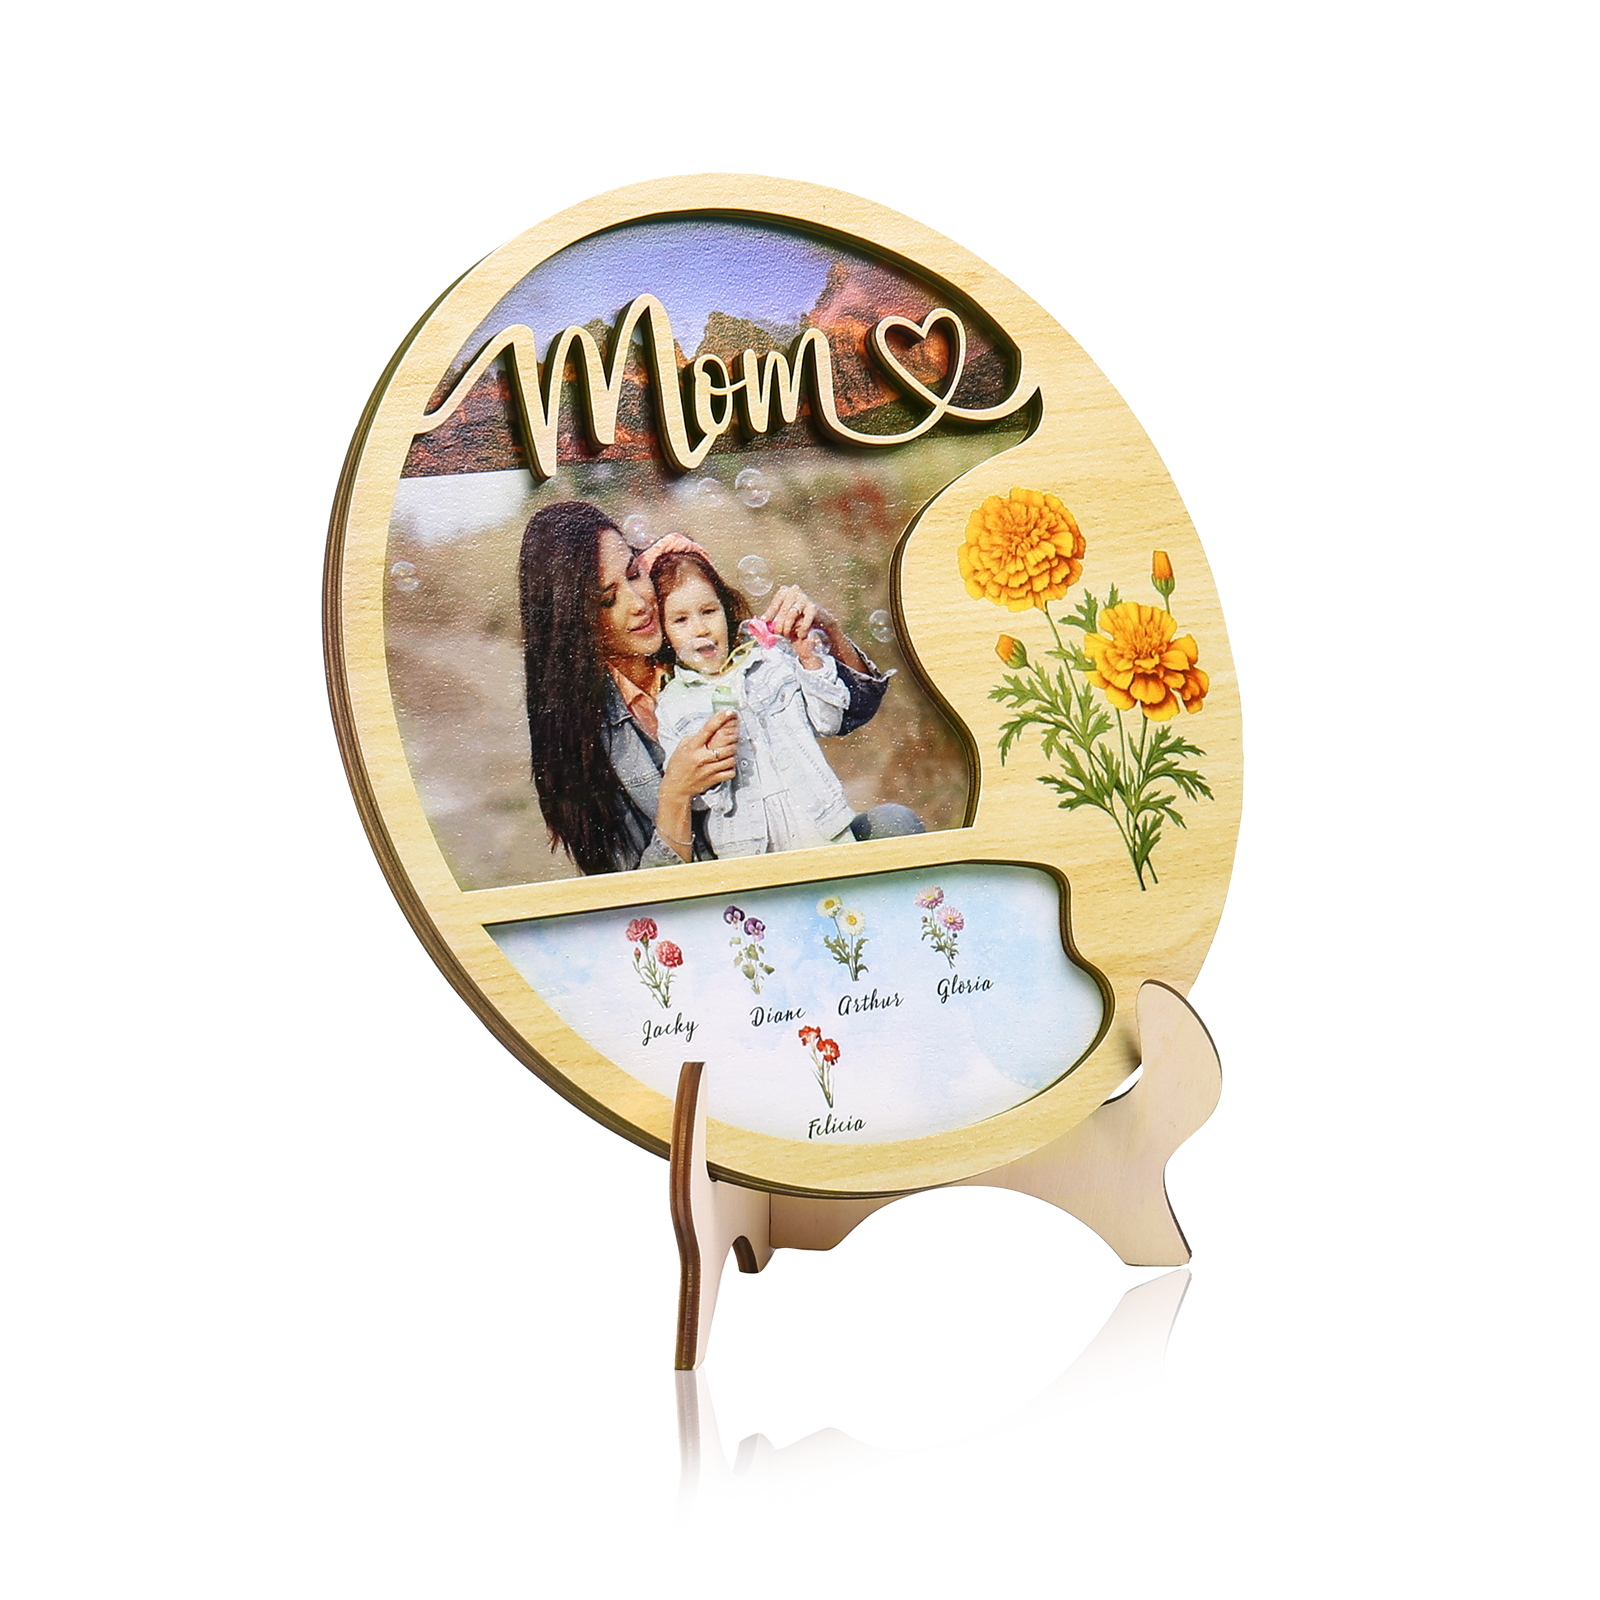 5 Names - Customized Photo Birth Flower Wooden Ornament Decoration for Mom